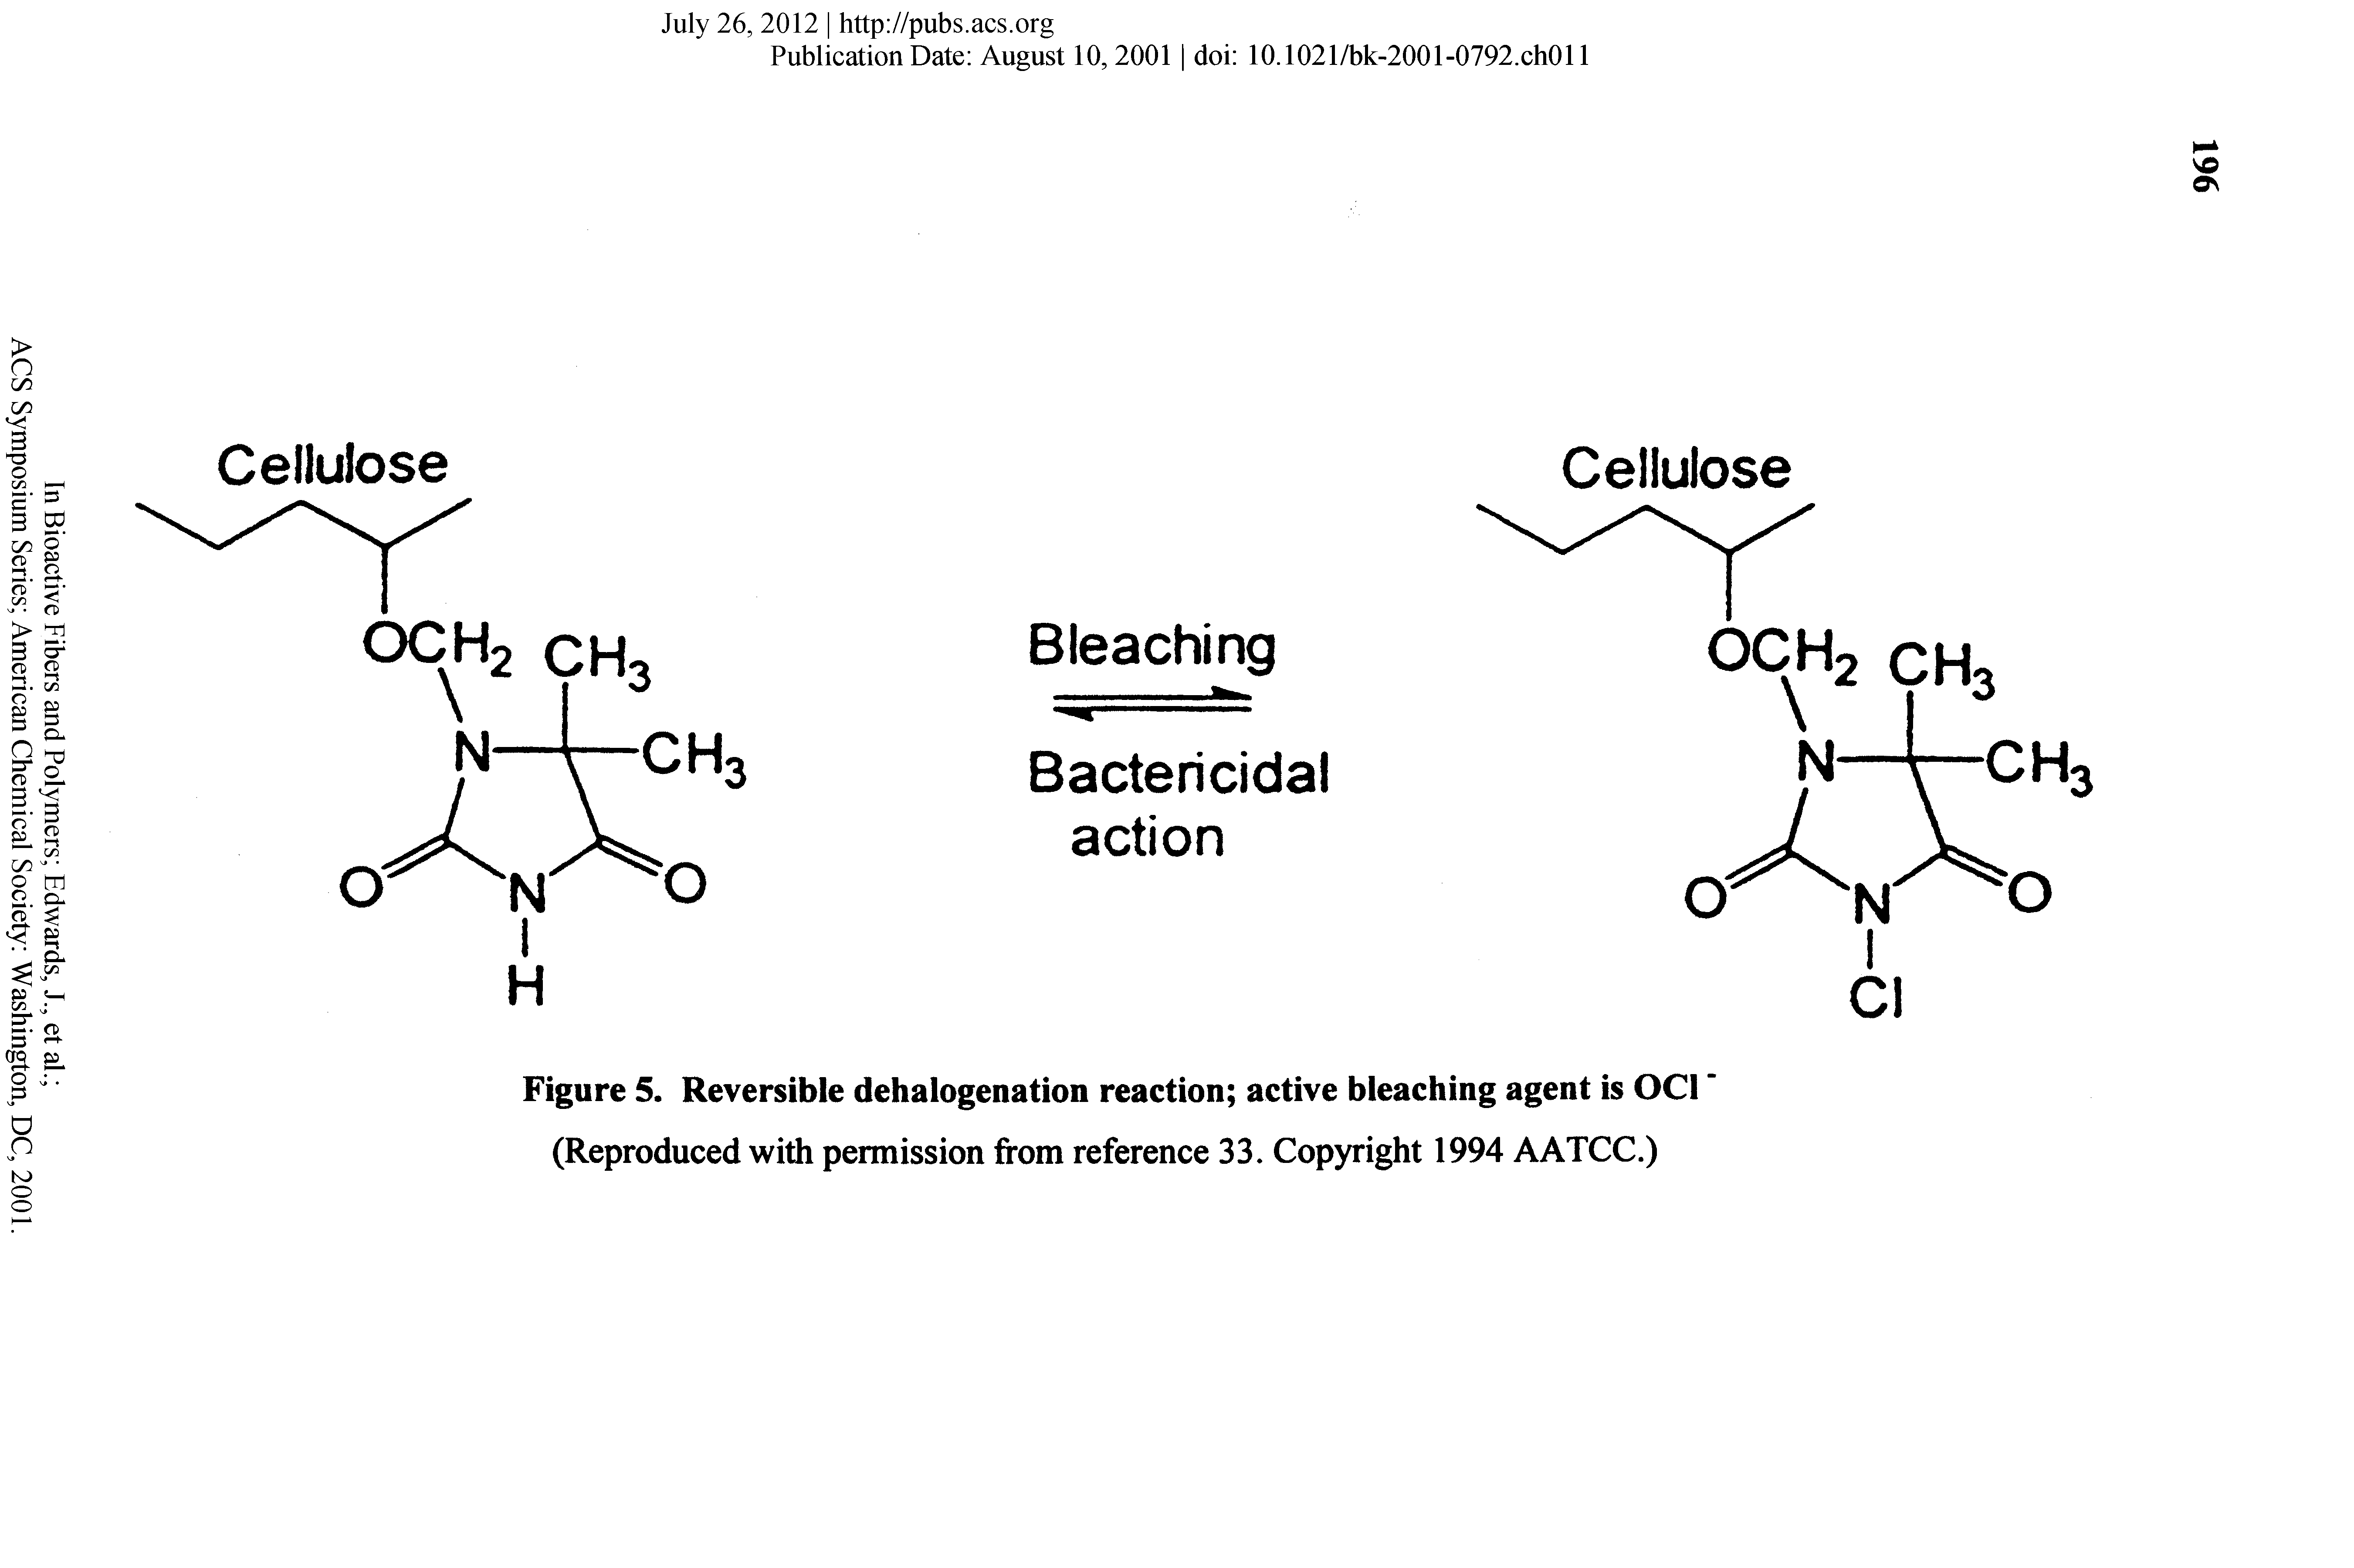 Figure 5. Reversible dehalogenation reaction active bleaching agent is OCI (Reproduced with permission from reference 33. Copyright 1994 AATCC.)...